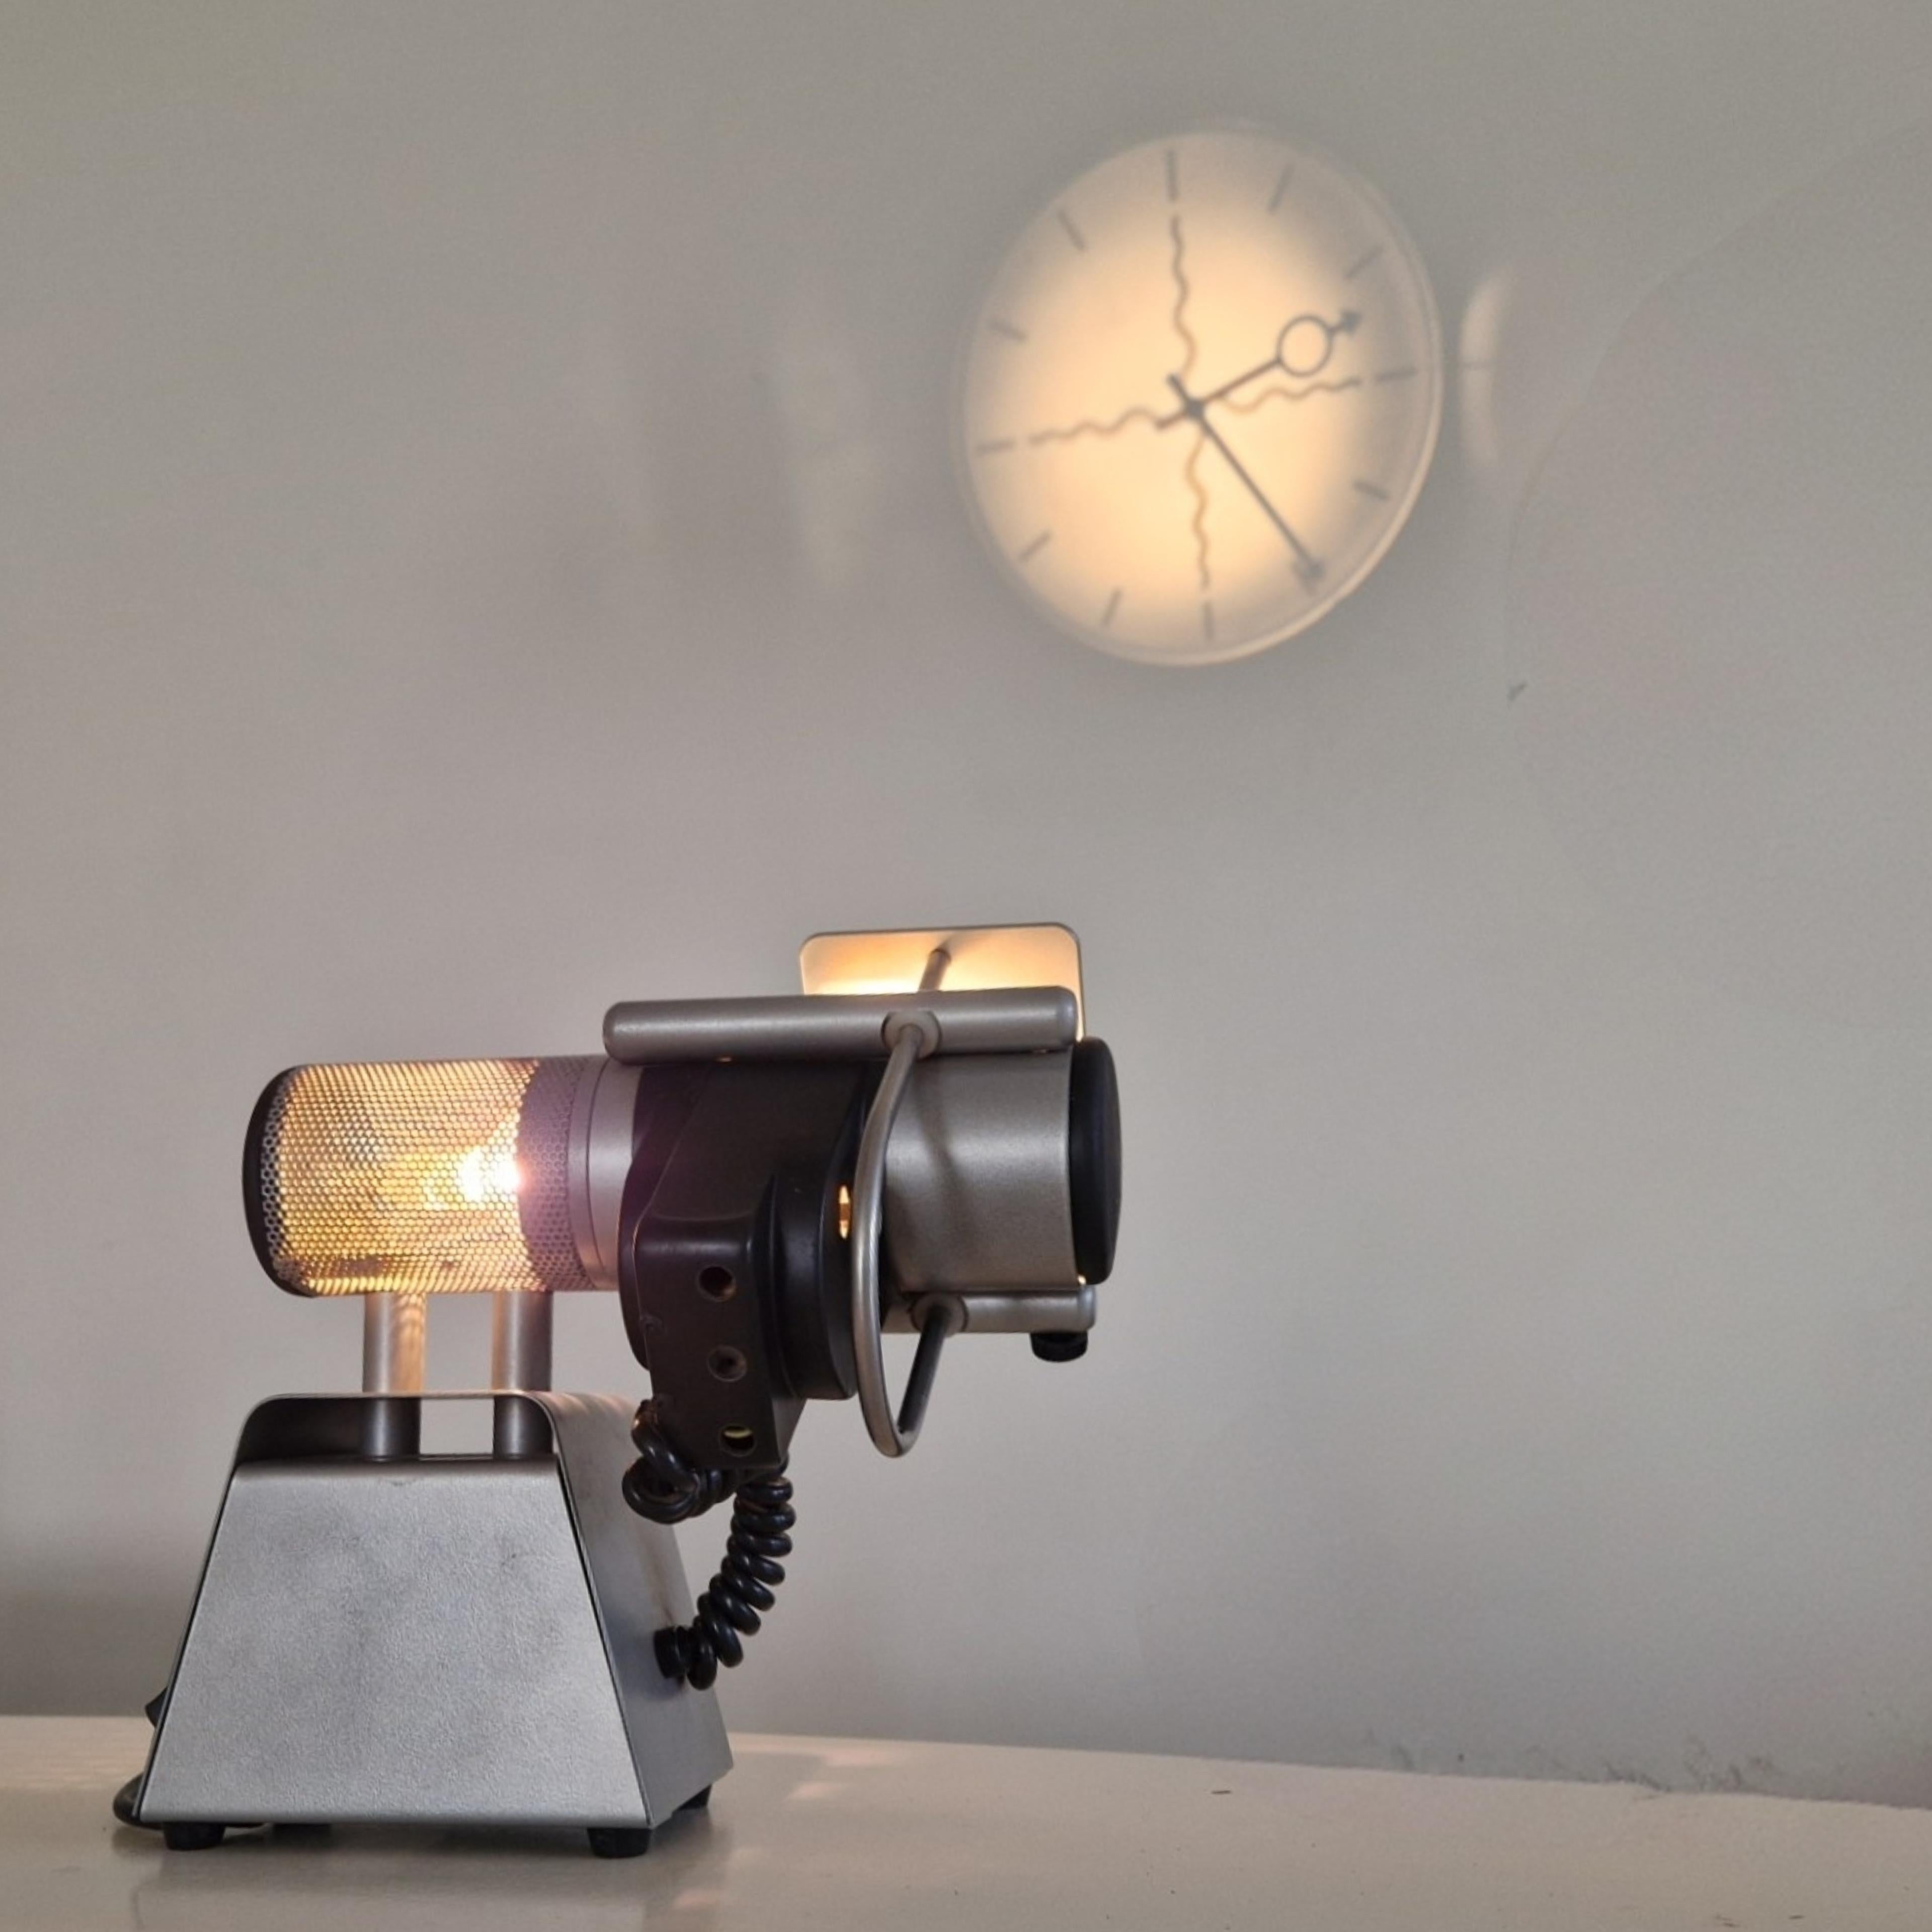 British Early production Timebeam classic clock by Stephen Savage, UK 1980s For Sale